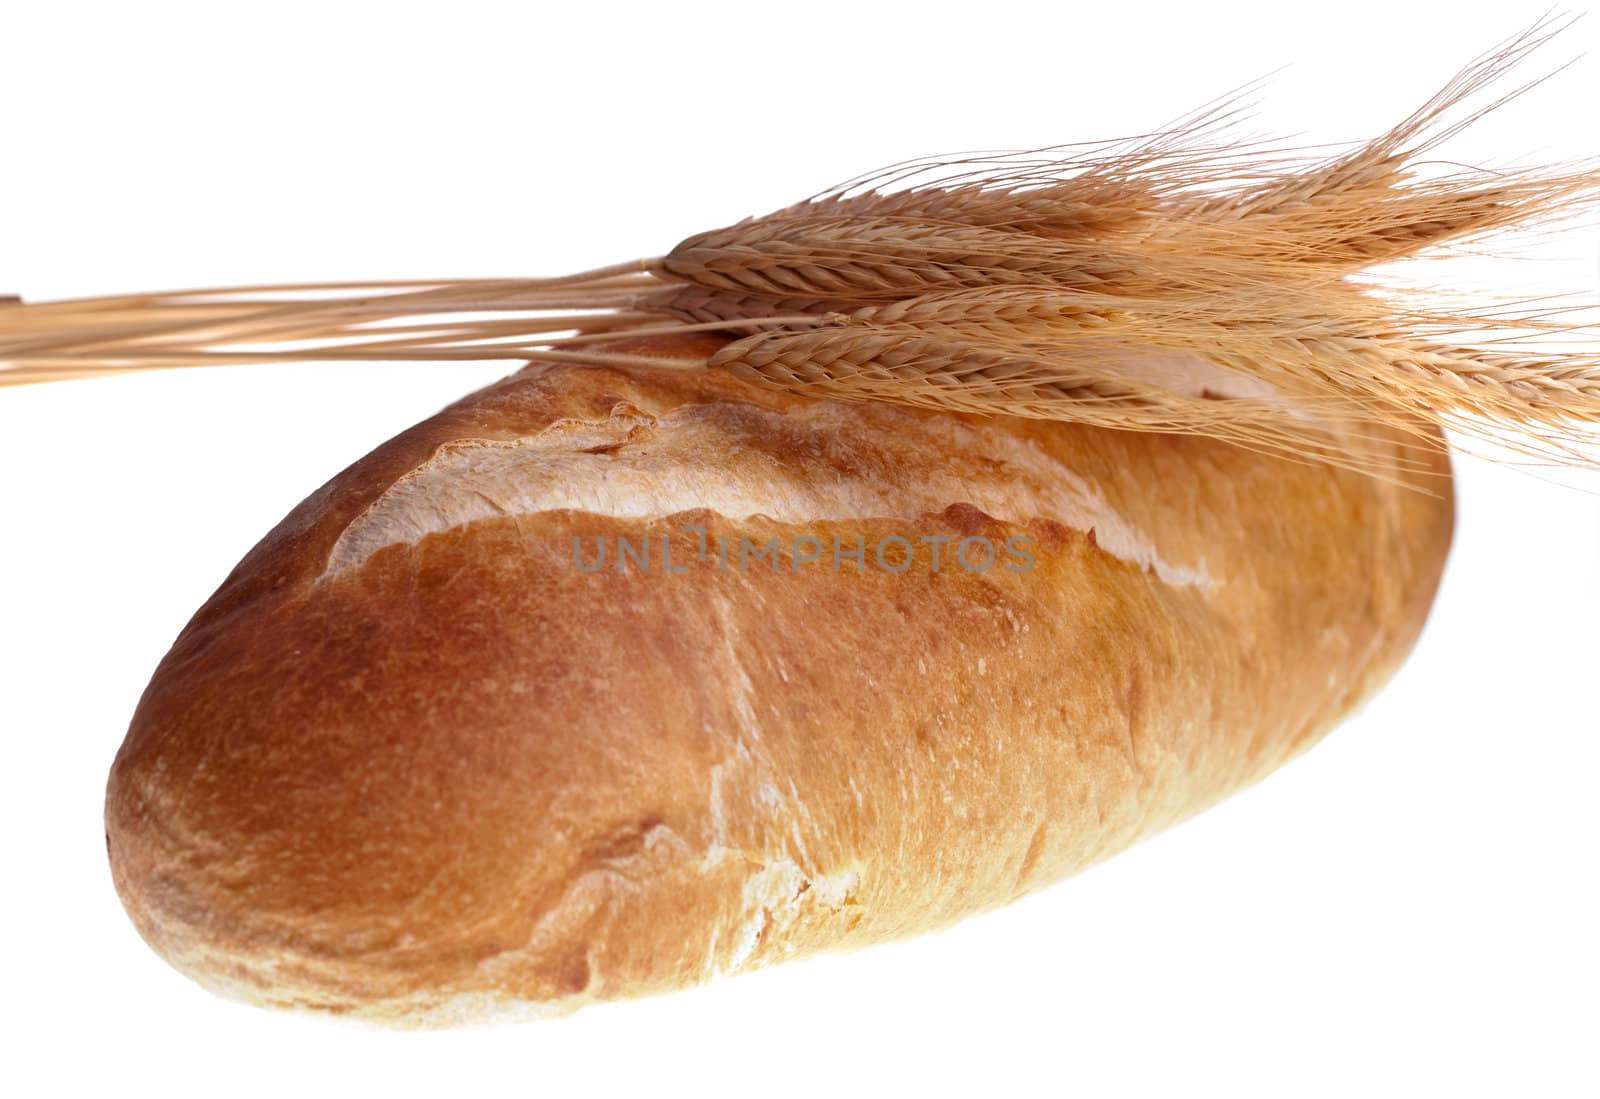 Loaf of bread by Marcus